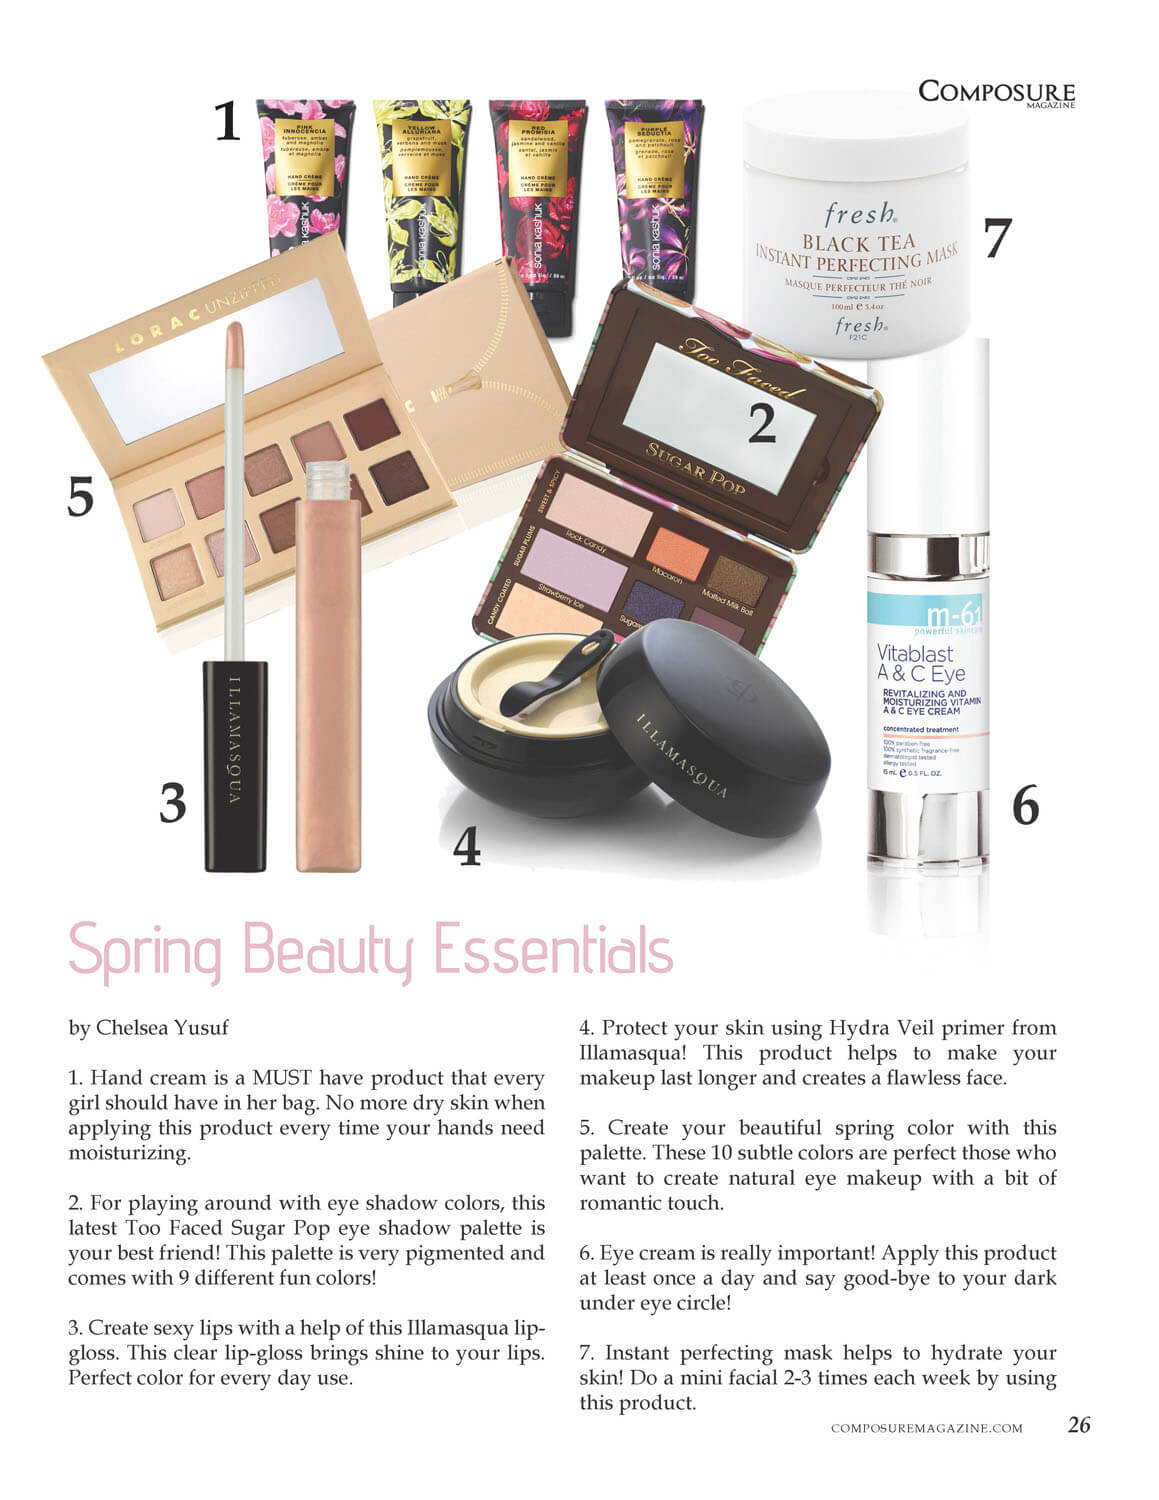 Spring Clean Your Makeup Bag and 5 Must-Have Products for Spring